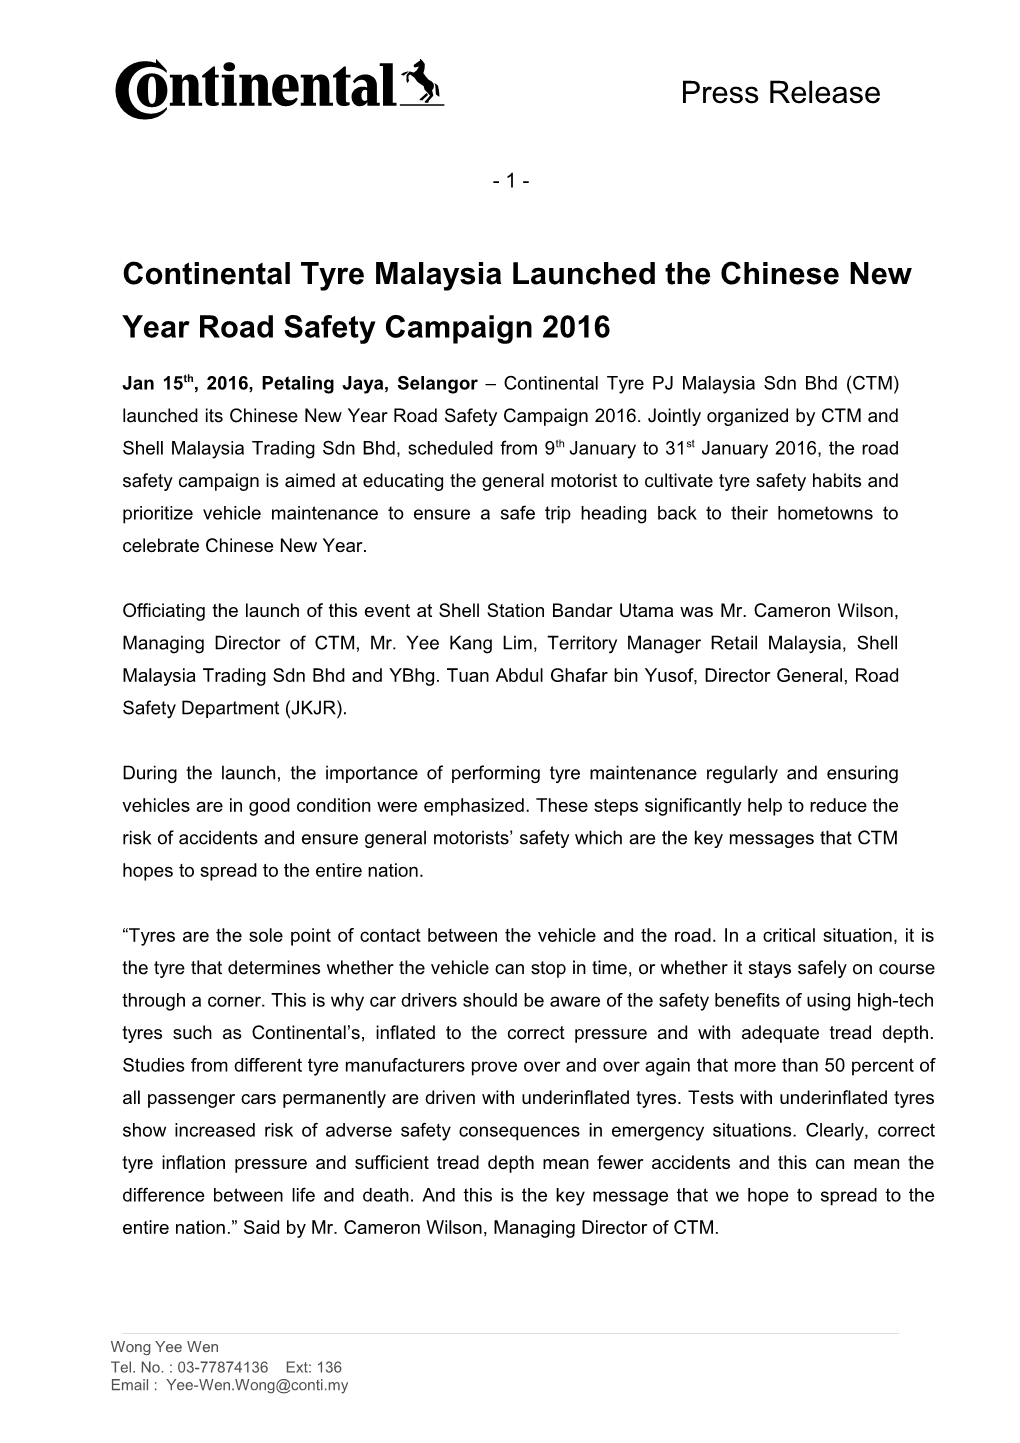 Continental Tyre Malaysia Launched the Chinese New Year Road Safety Campaign 2016